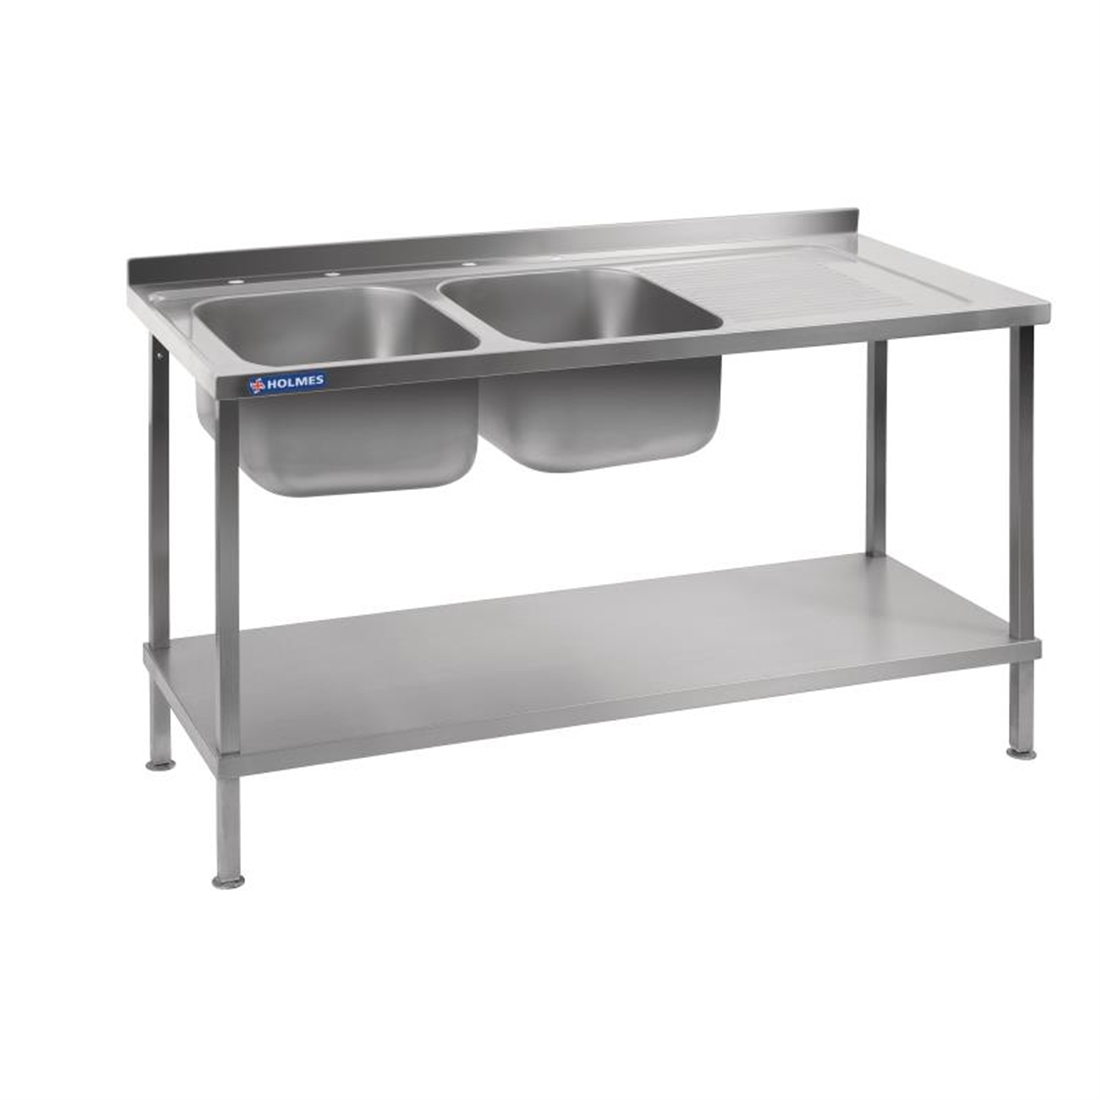 Holmes Fully Assembled Stainless Steel Sink Right Hand Drainer 1800mm